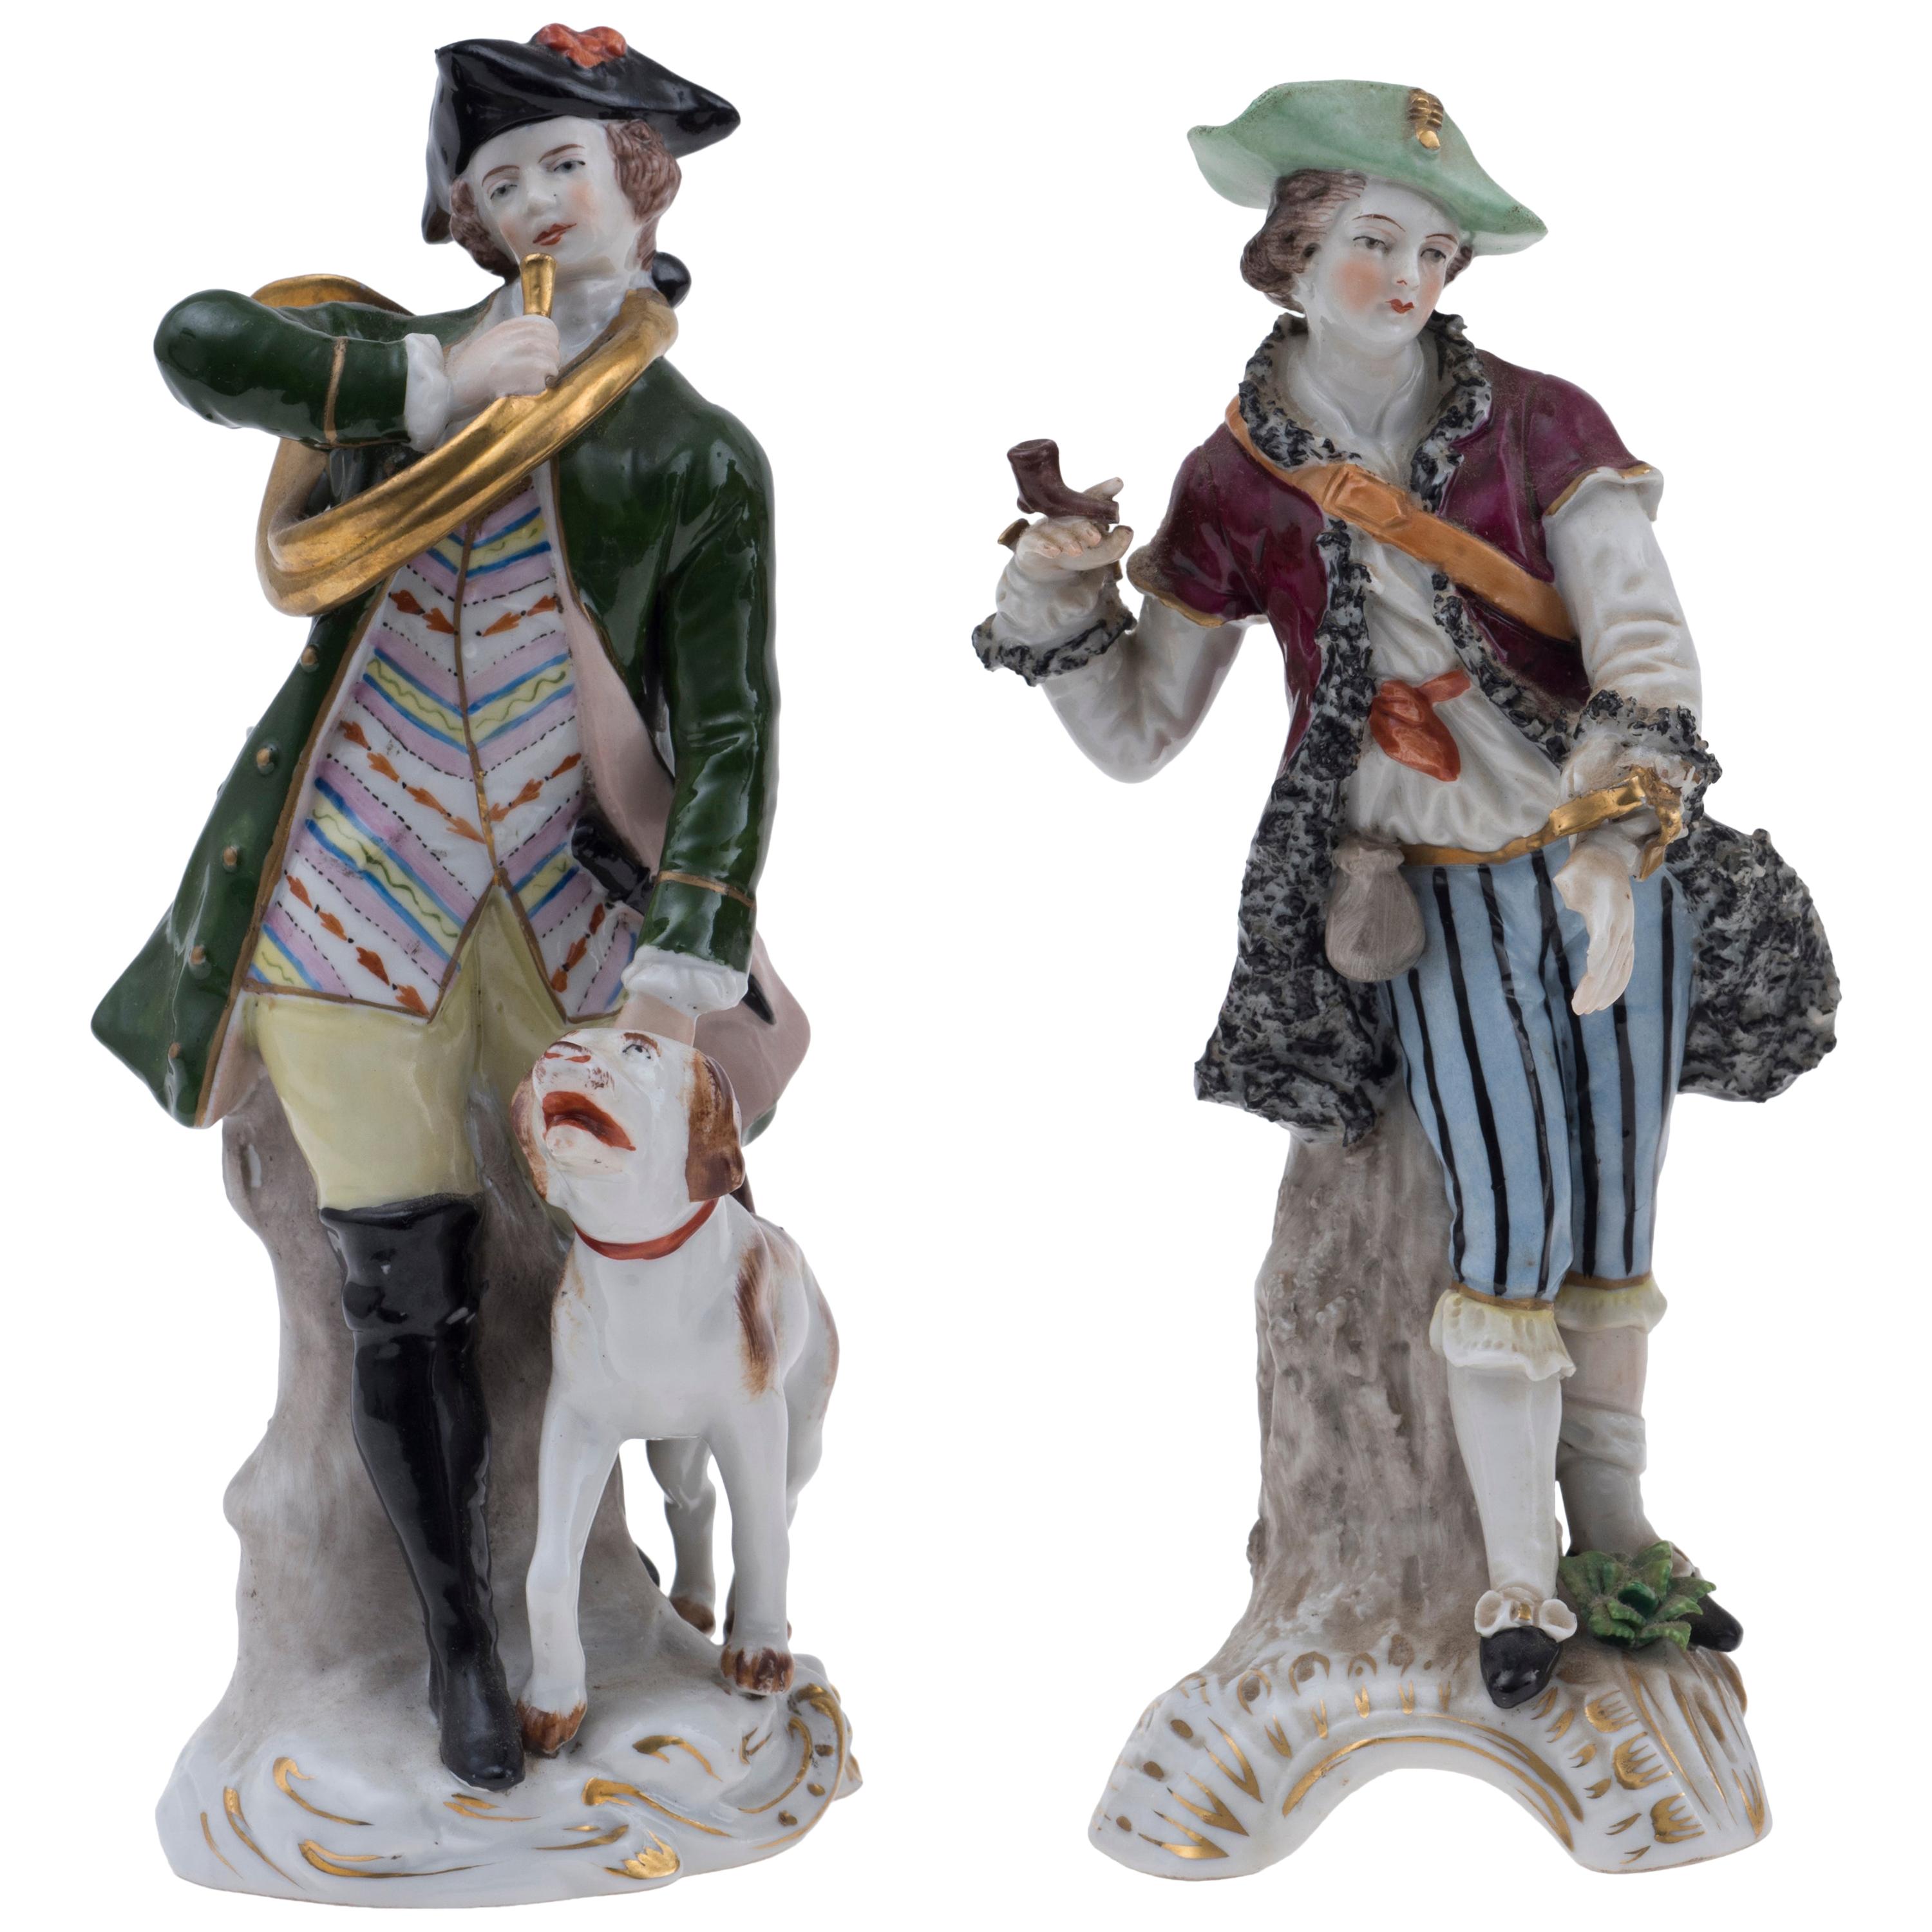 Hunters, Ancient Polychrome Porcelains, Real Fabrica Napoli, 1800